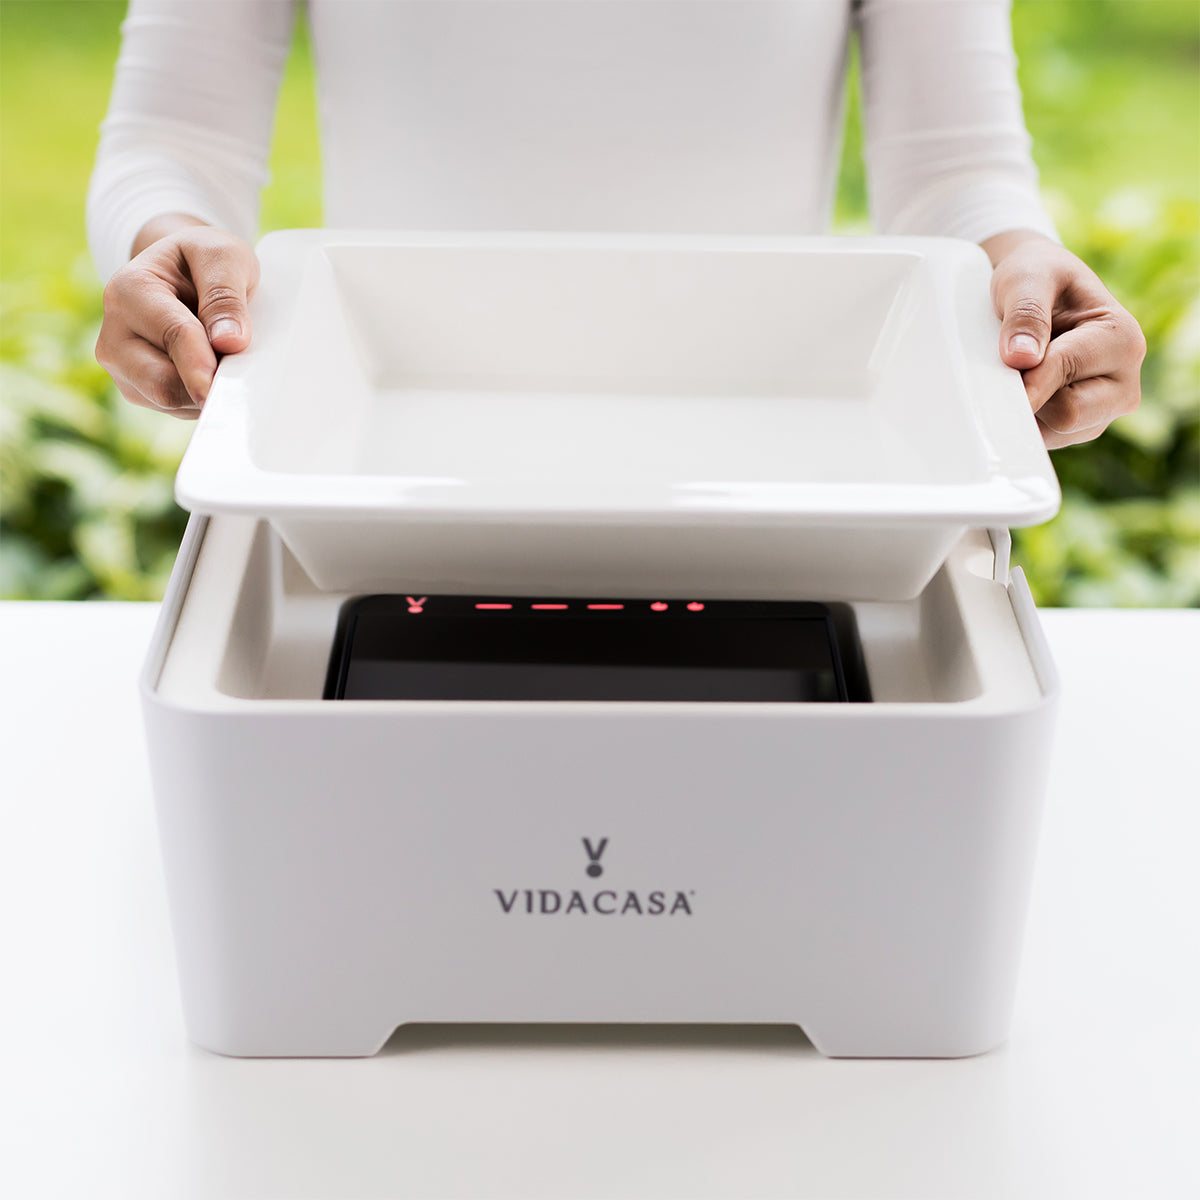 Vidacasa® Classic S305 Square is the world’s first buffetware equipment that can maintain cold foods chilled at 4ºC (39ºF) without ice; Maintain cooked foods hot at 80ºC (176ºF) for hours without dangling cords or chafing fuels.